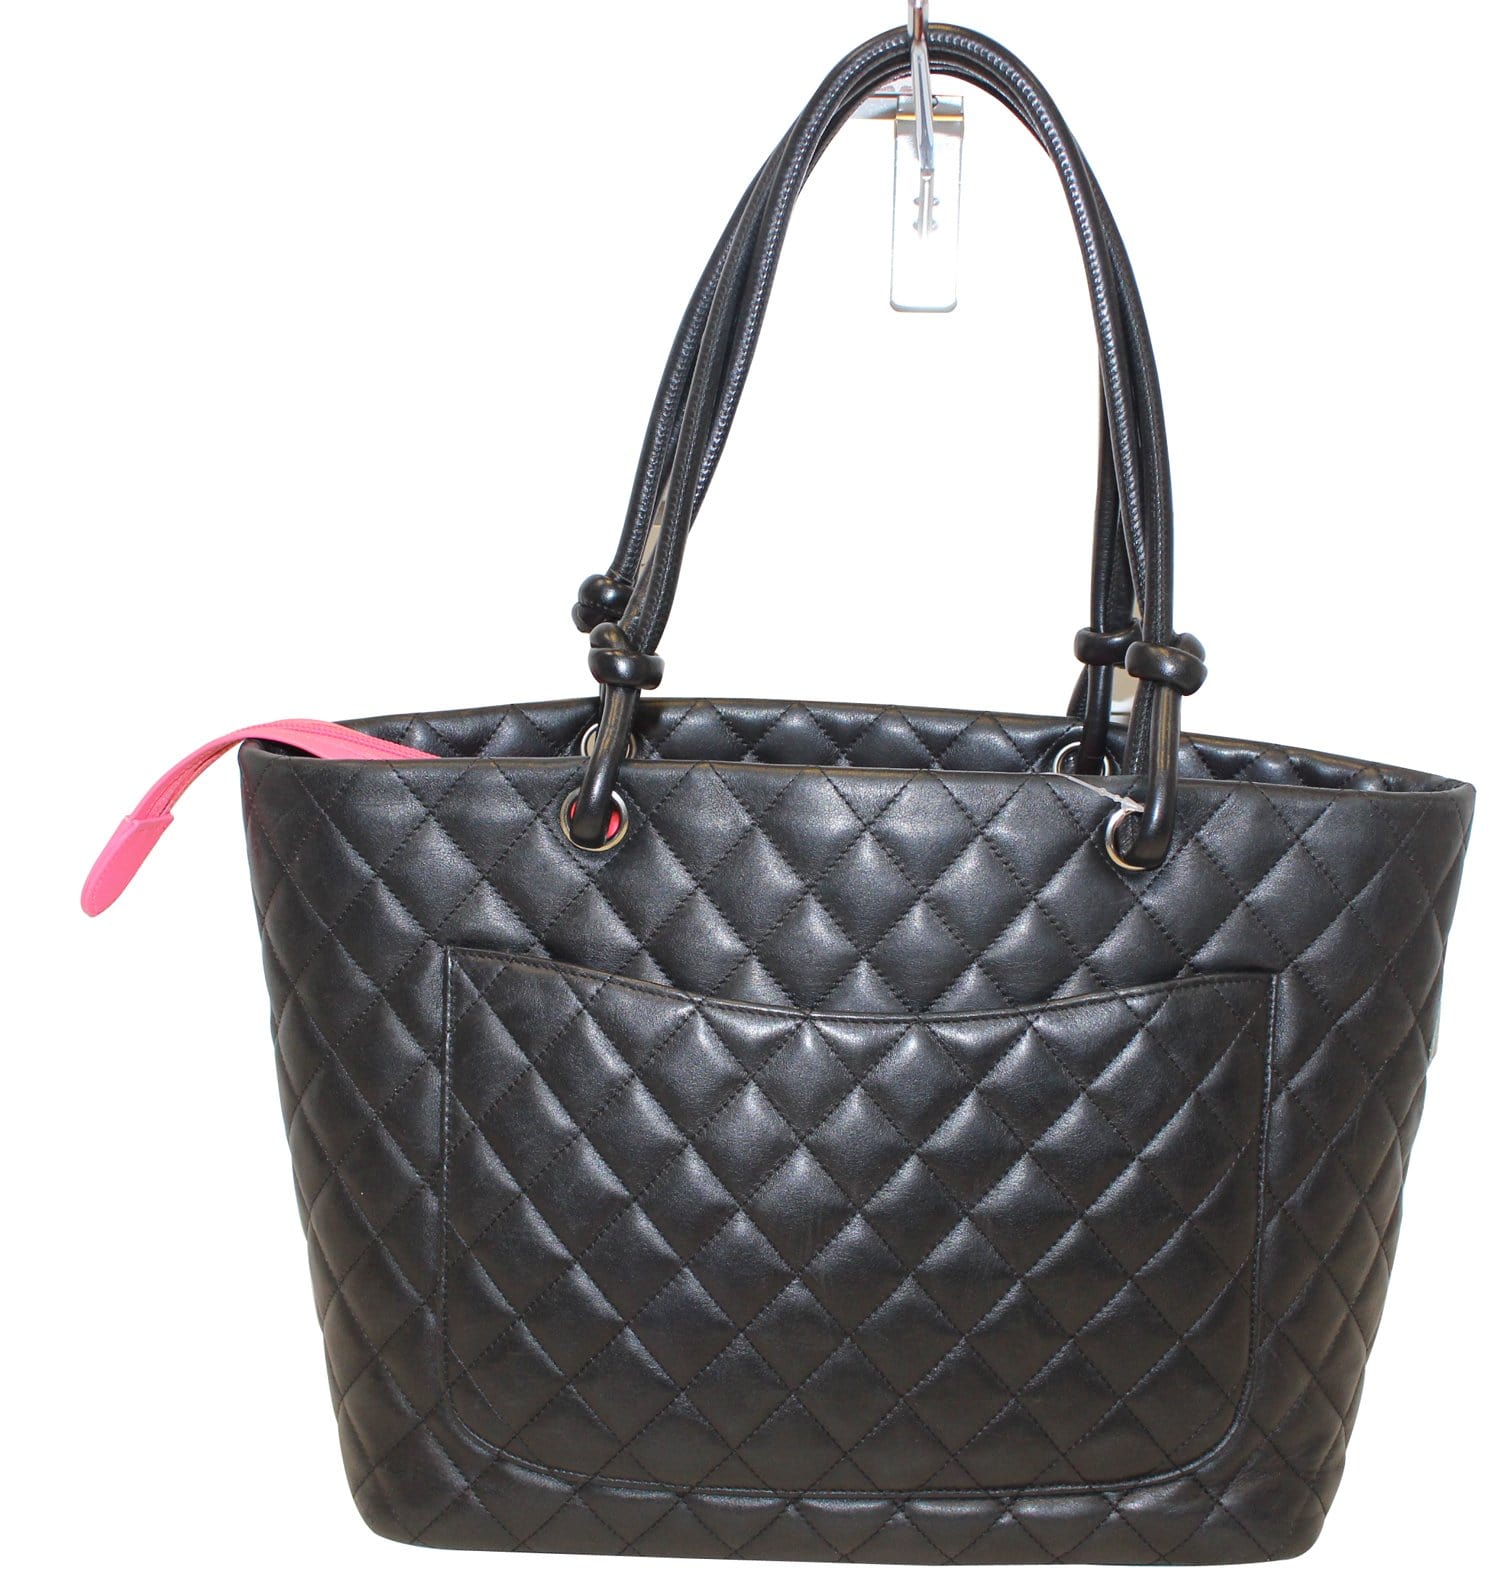 Chanel Black Quilted Caviar Leather Large Zip CC Shopping Tote Bag -  RvceShops's Closet - Chanel Cambon handbag in black quilted leather and  white leather